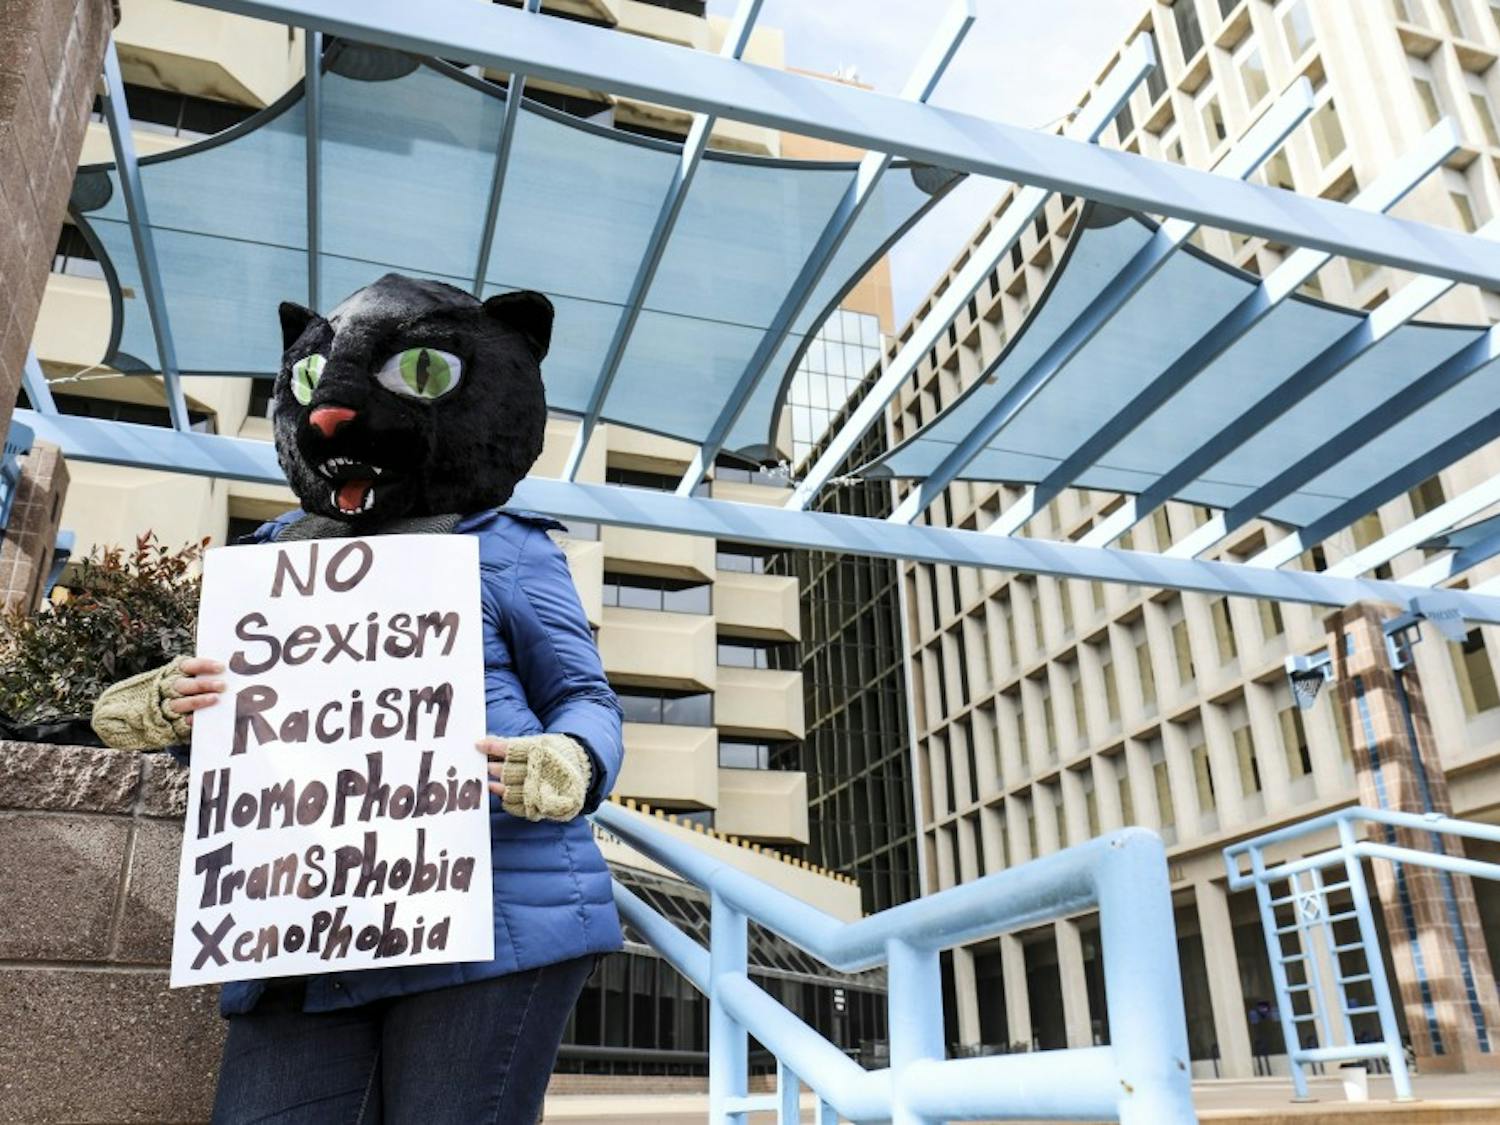 A woman?s rights supporter holds a sign while wearing a cat costume during the women?s march at the Civic Plaza. Hundreds of women, children and men attended the event in support of gender rights and other causes.
